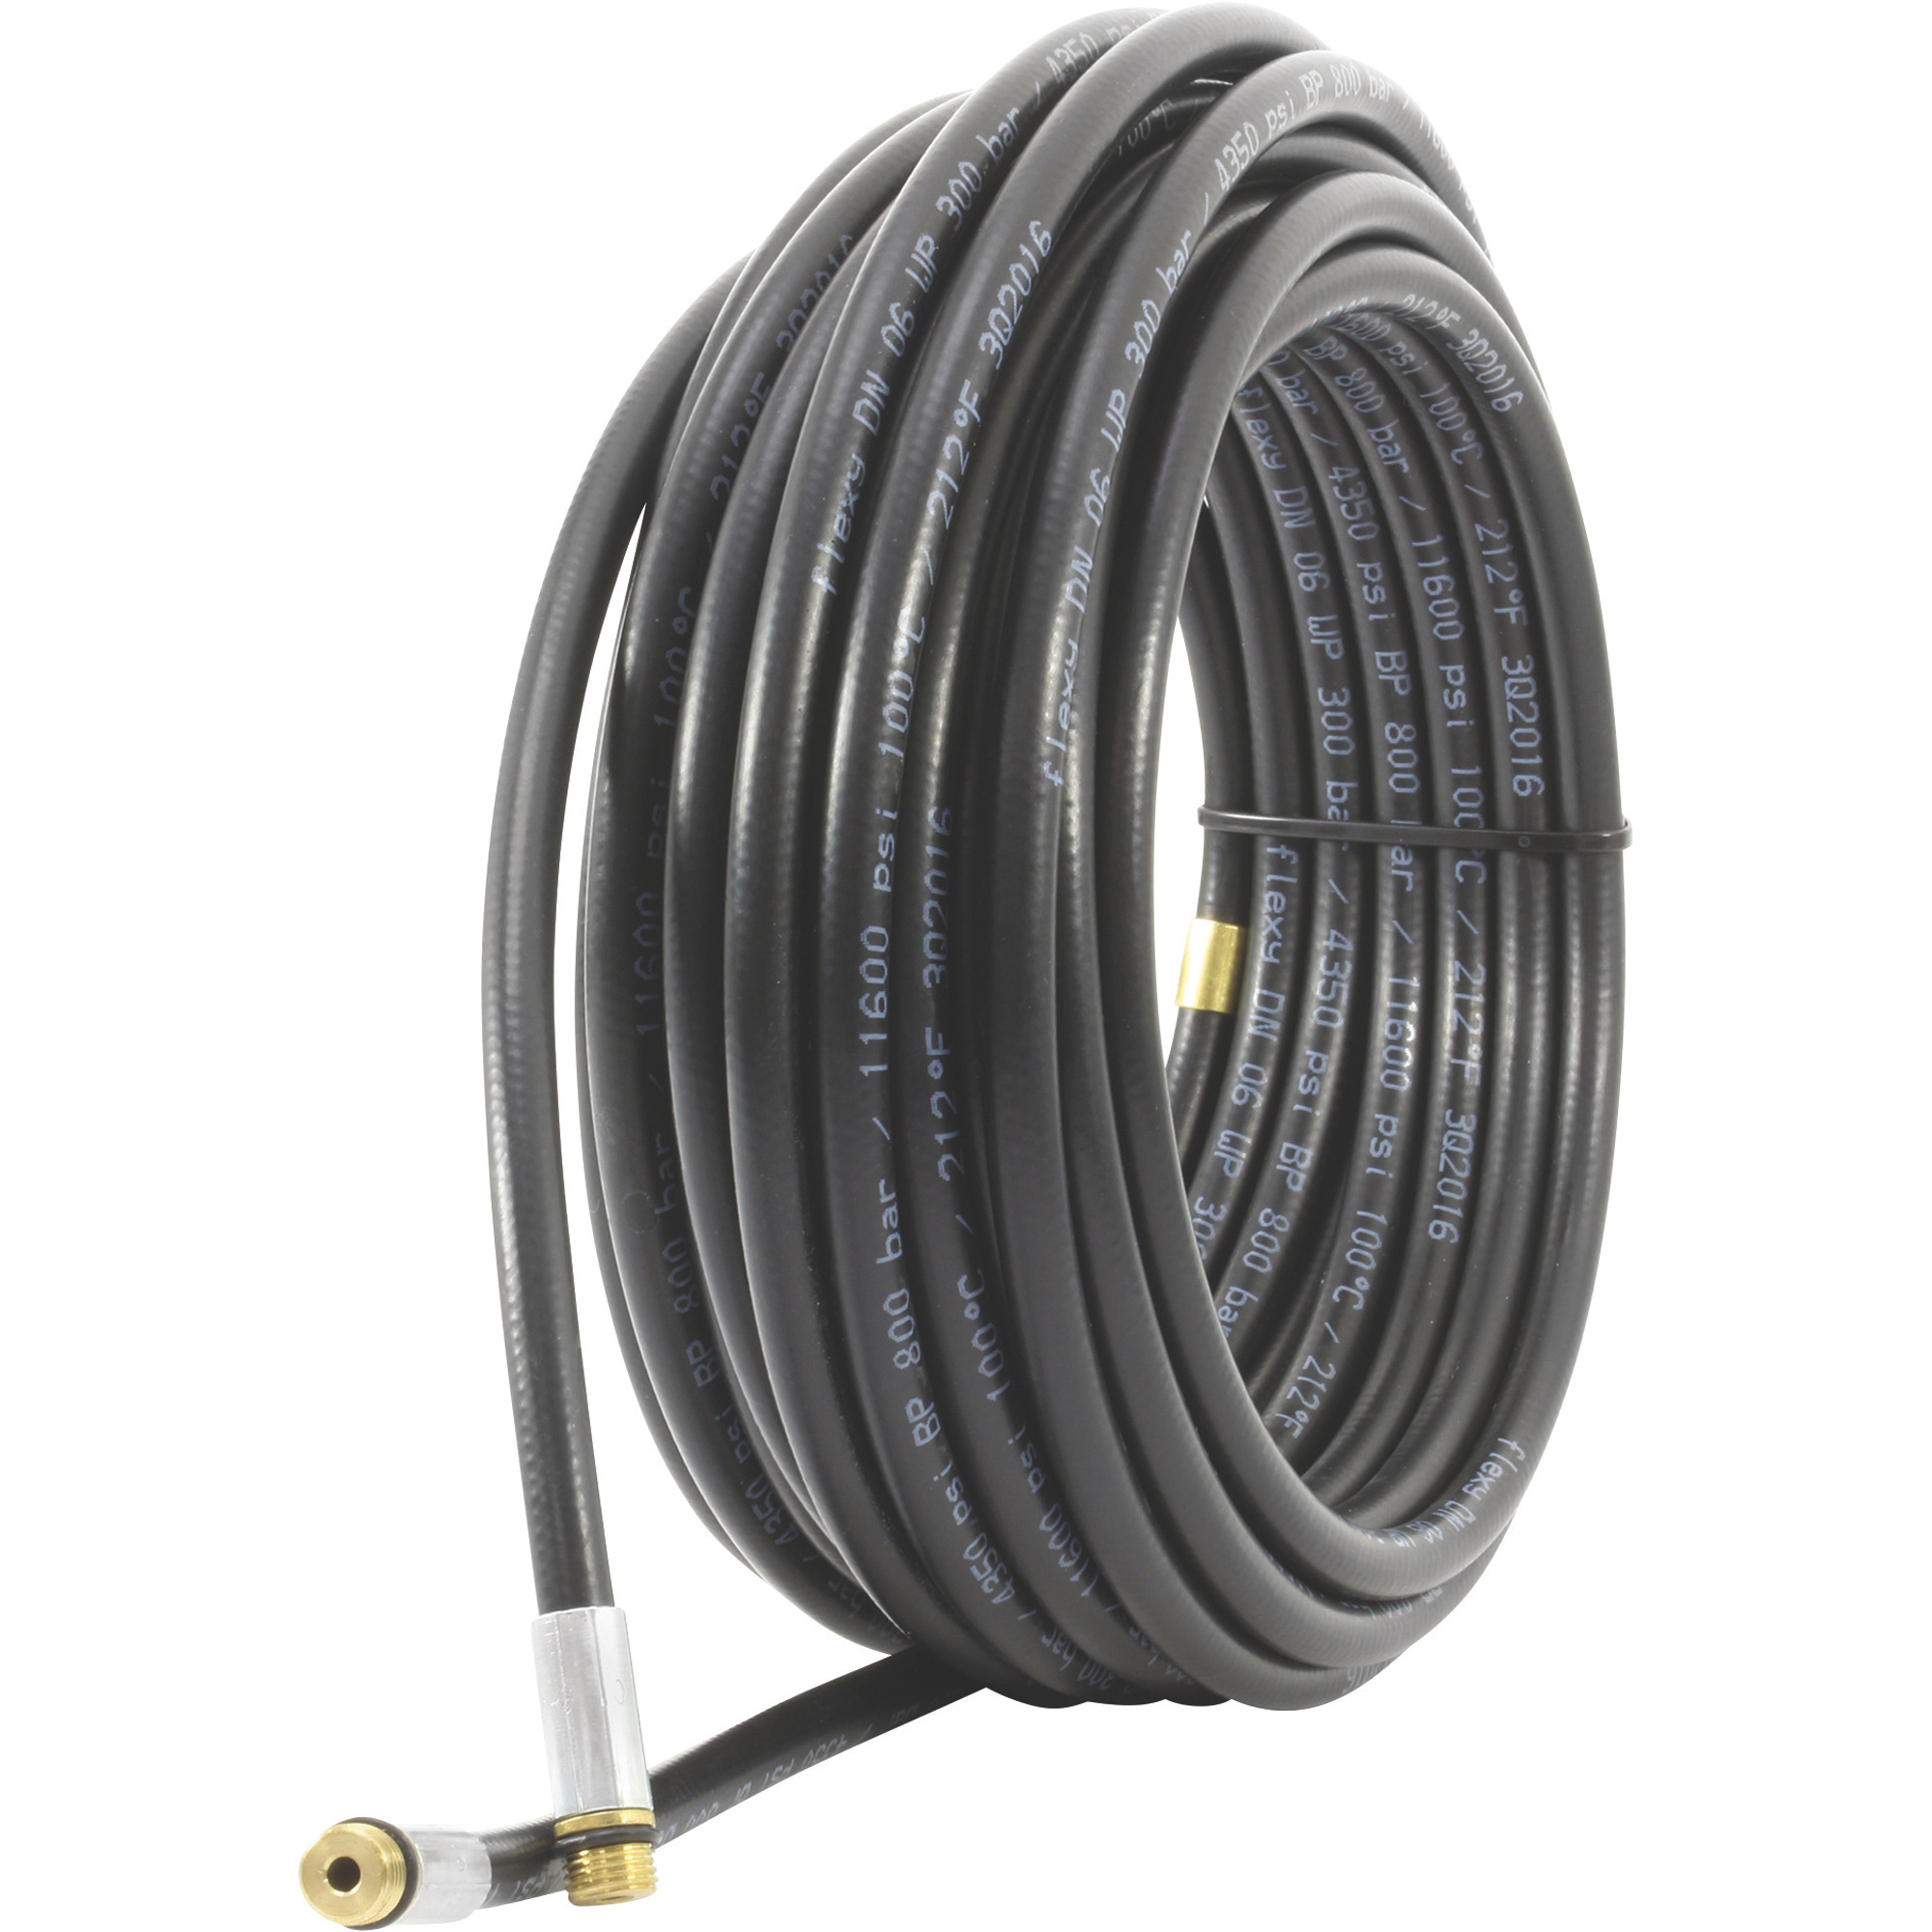 DTE Sewer Jetting Hose, 4500 PSI, 100ft. x 1/4Inch